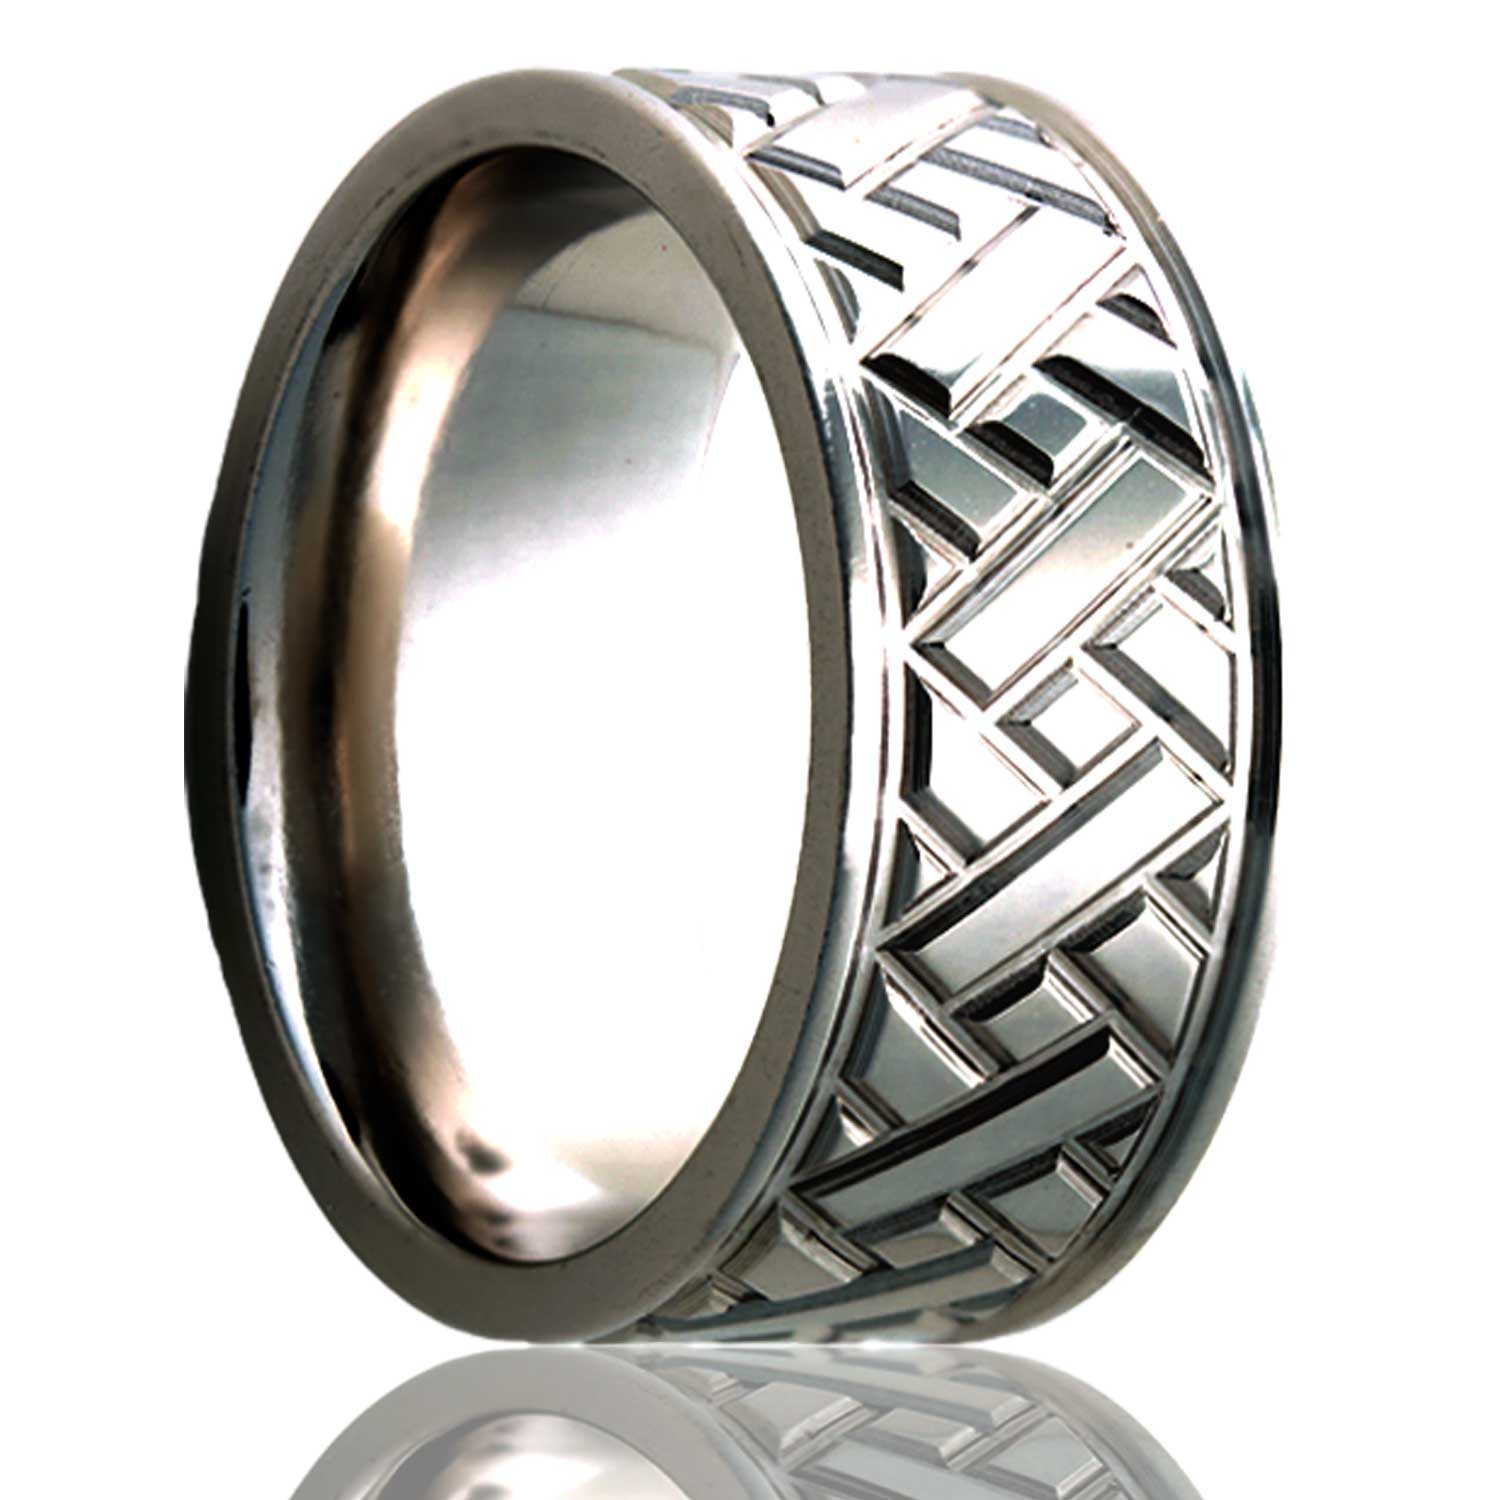 A grooved diagonal pattern titanium wedding band displayed on a neutral white background.